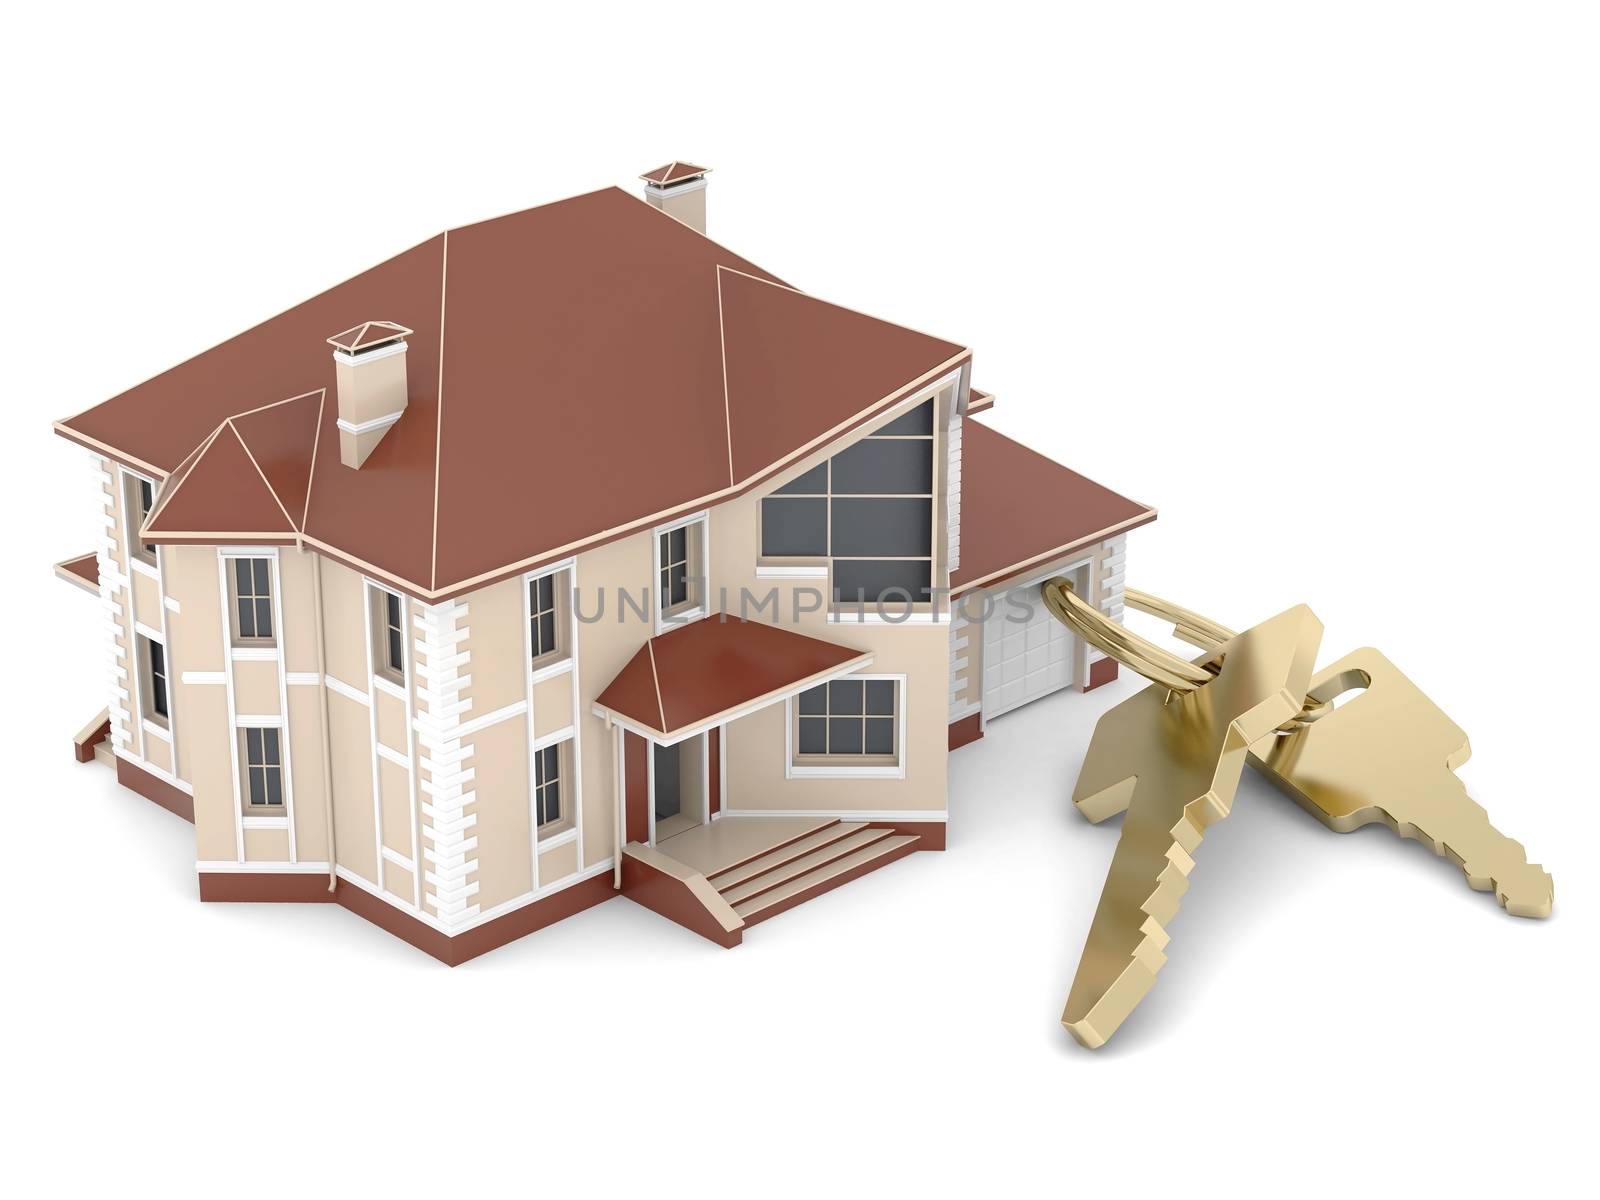 House with keys, home buying, ownership or security concept